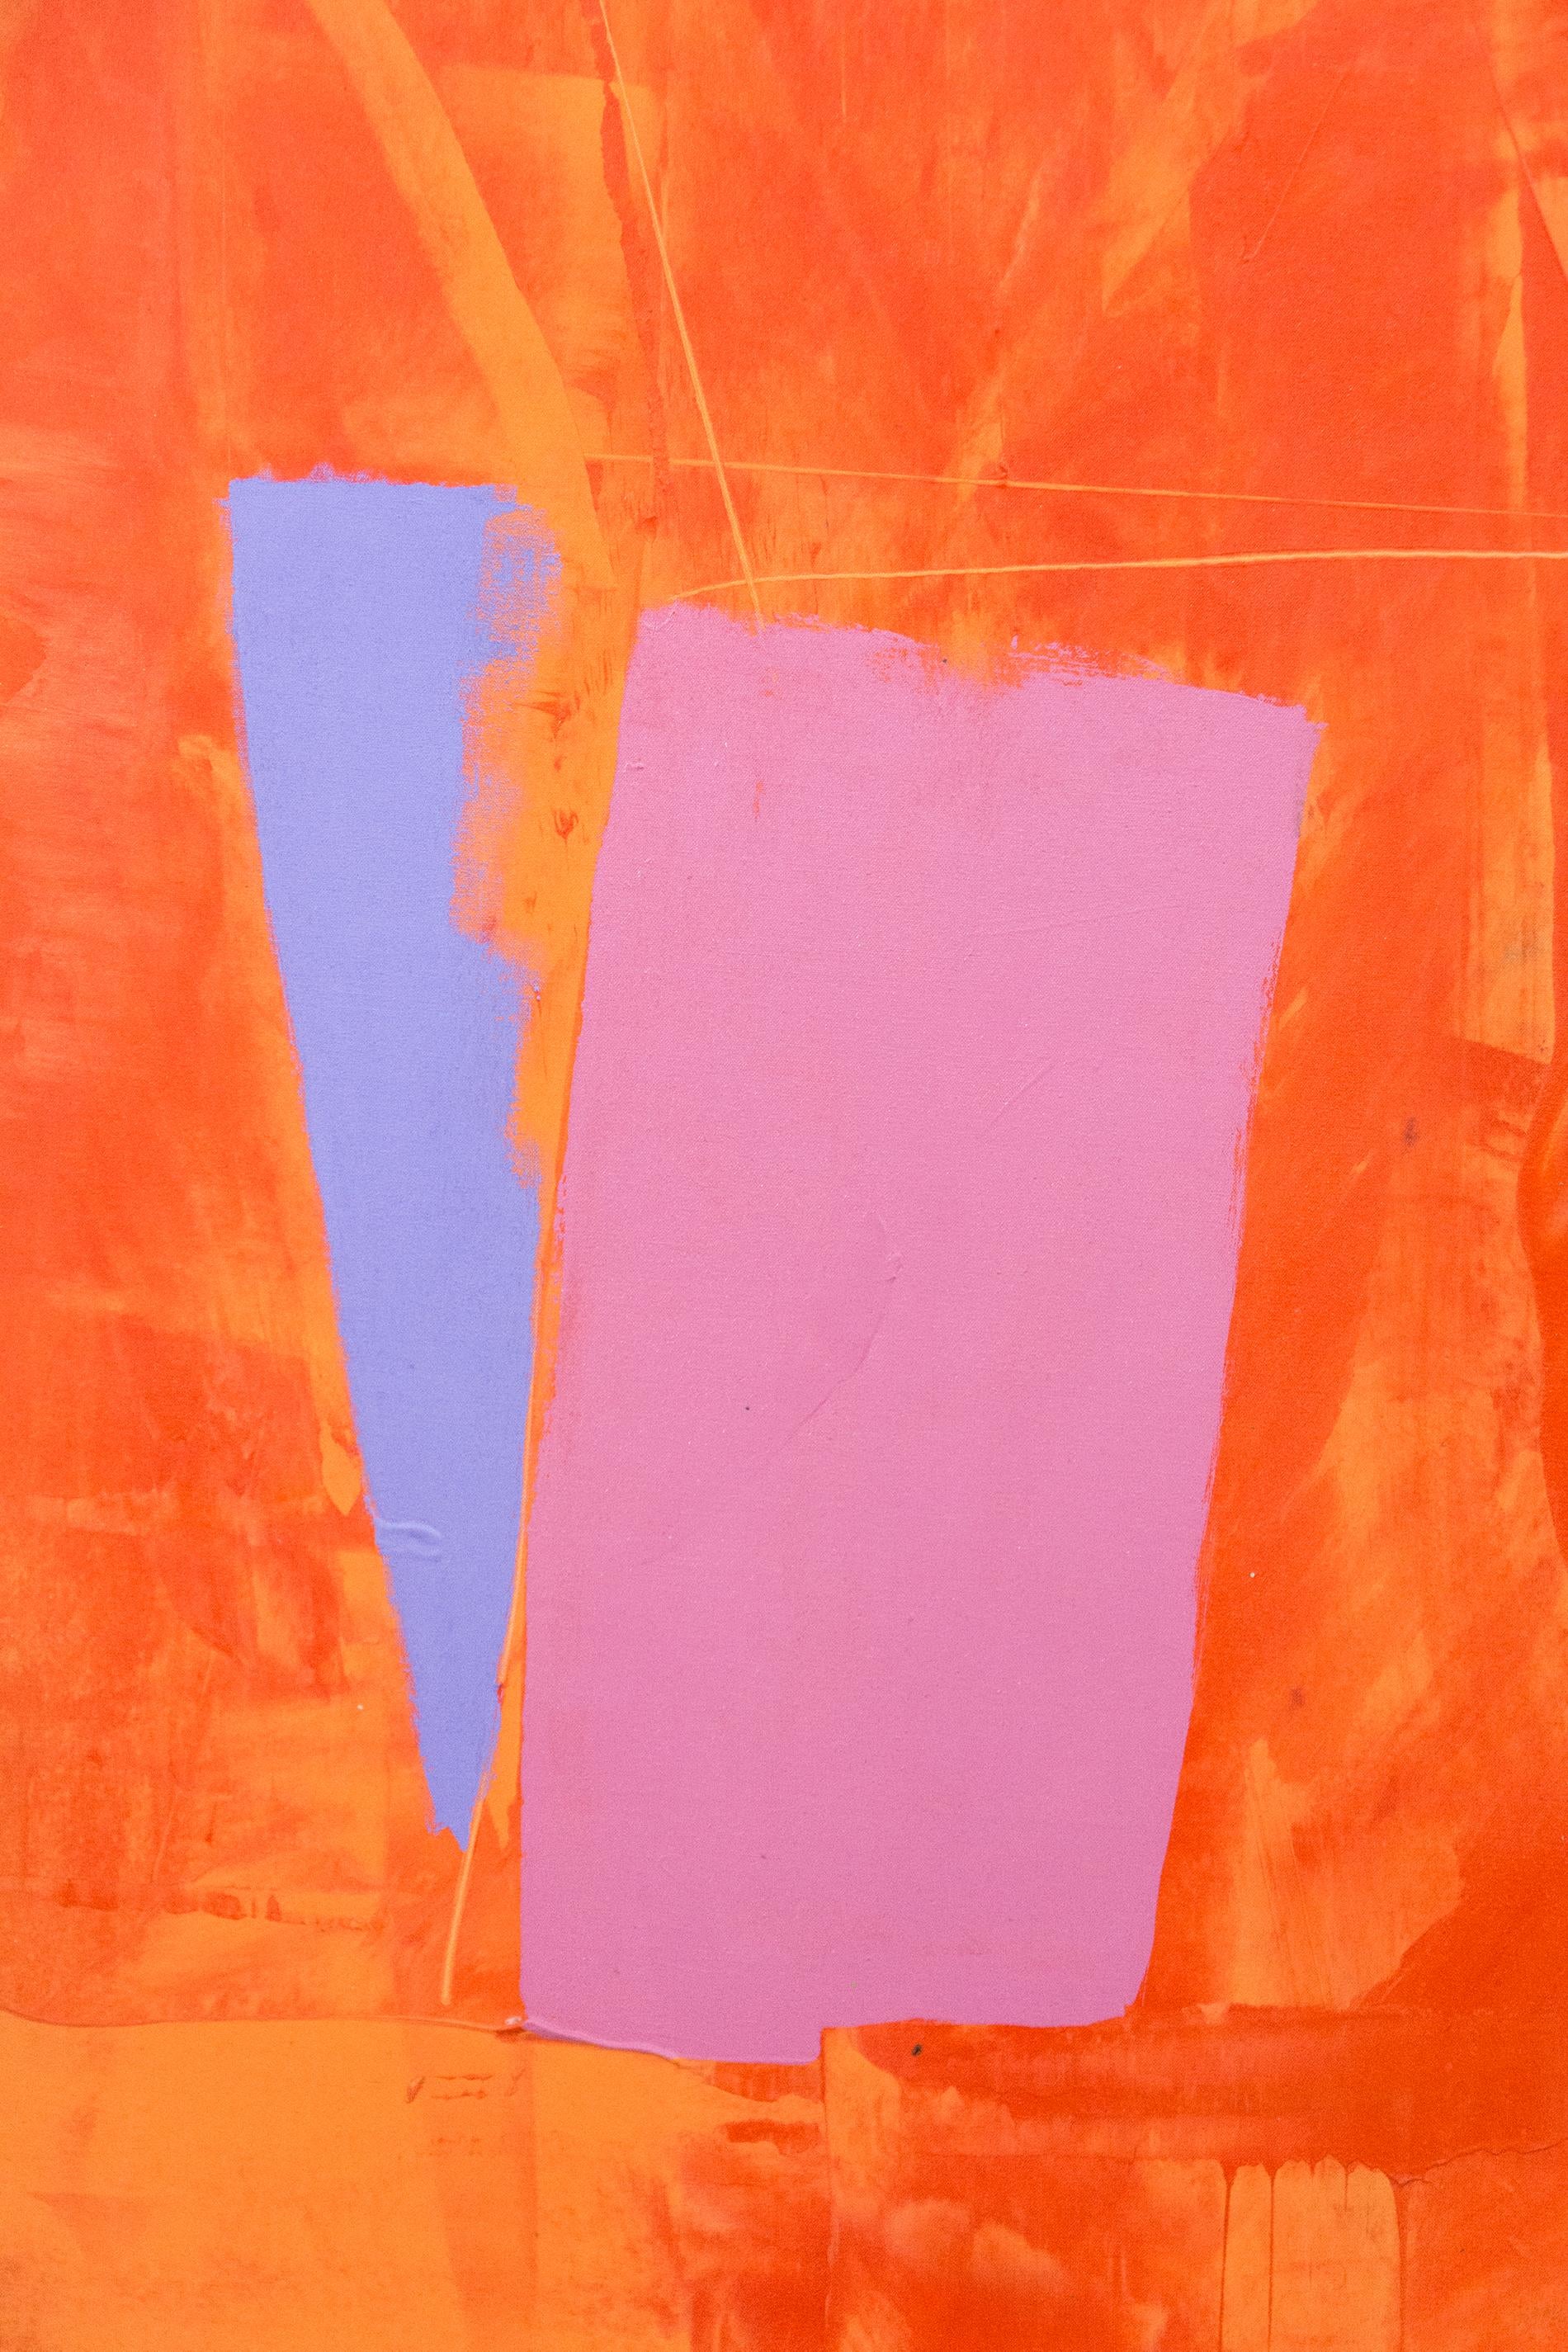 Abstraction in Orange - large, bold, gestural, postmodern, acrylic on canvas - Painting by David Bolduc